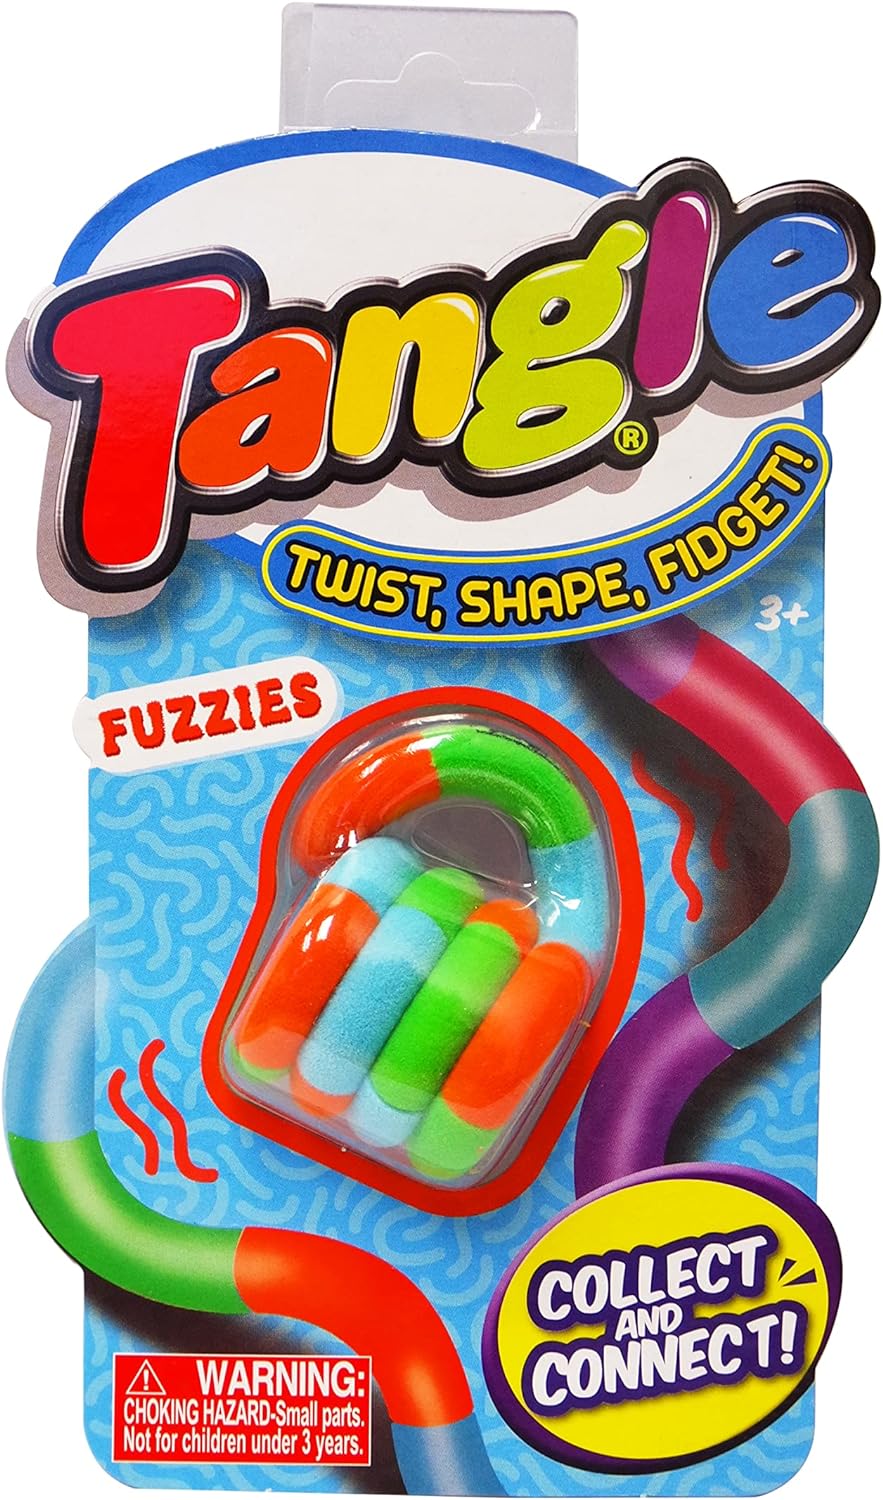 The product package for Tangle Jr. Fuzzies Fidget.